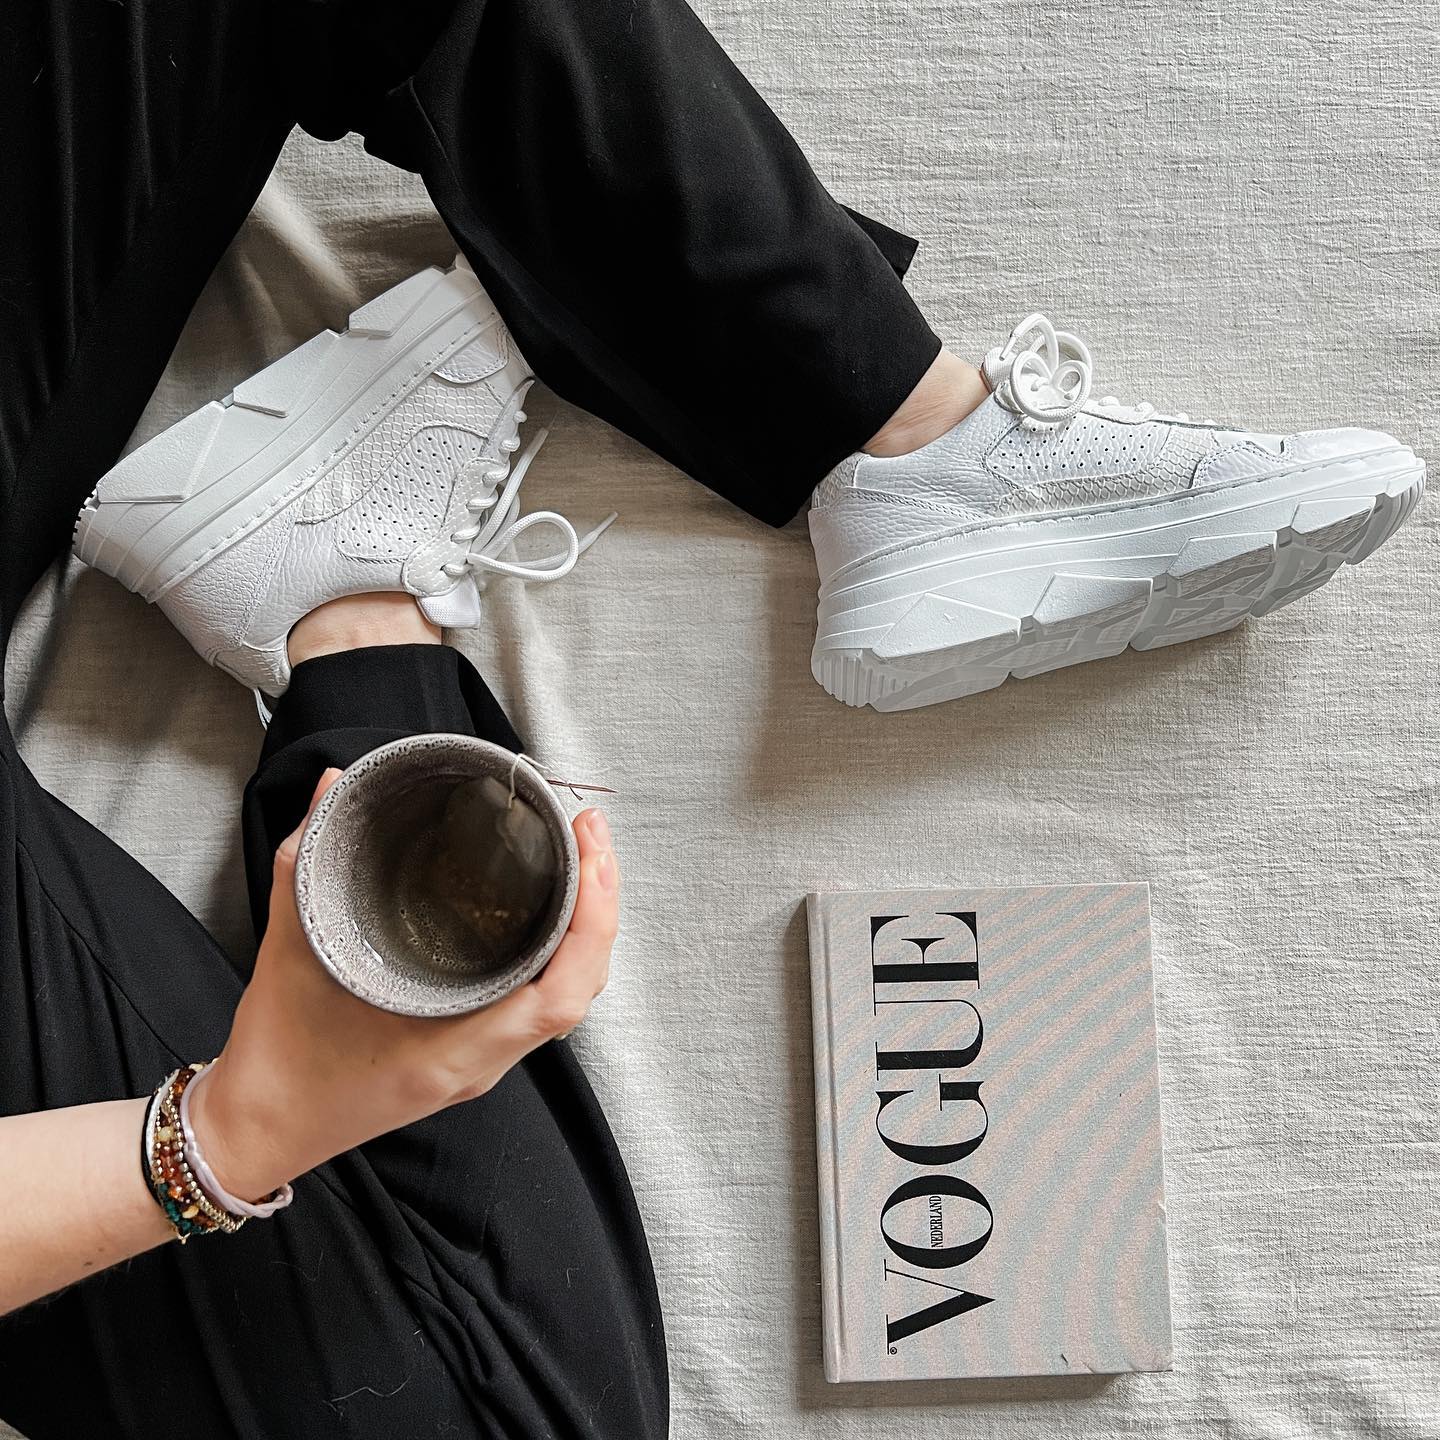 Our FAVE white sneakers😍 Witte sneakers maken elke outfit af! Een must in je garderobe👟
#sneakers #musthave #newcollection #bestseller #favorite #vogue #bloggerstyle #juulbelle #byjet #sneakeraddict #sneakerlove